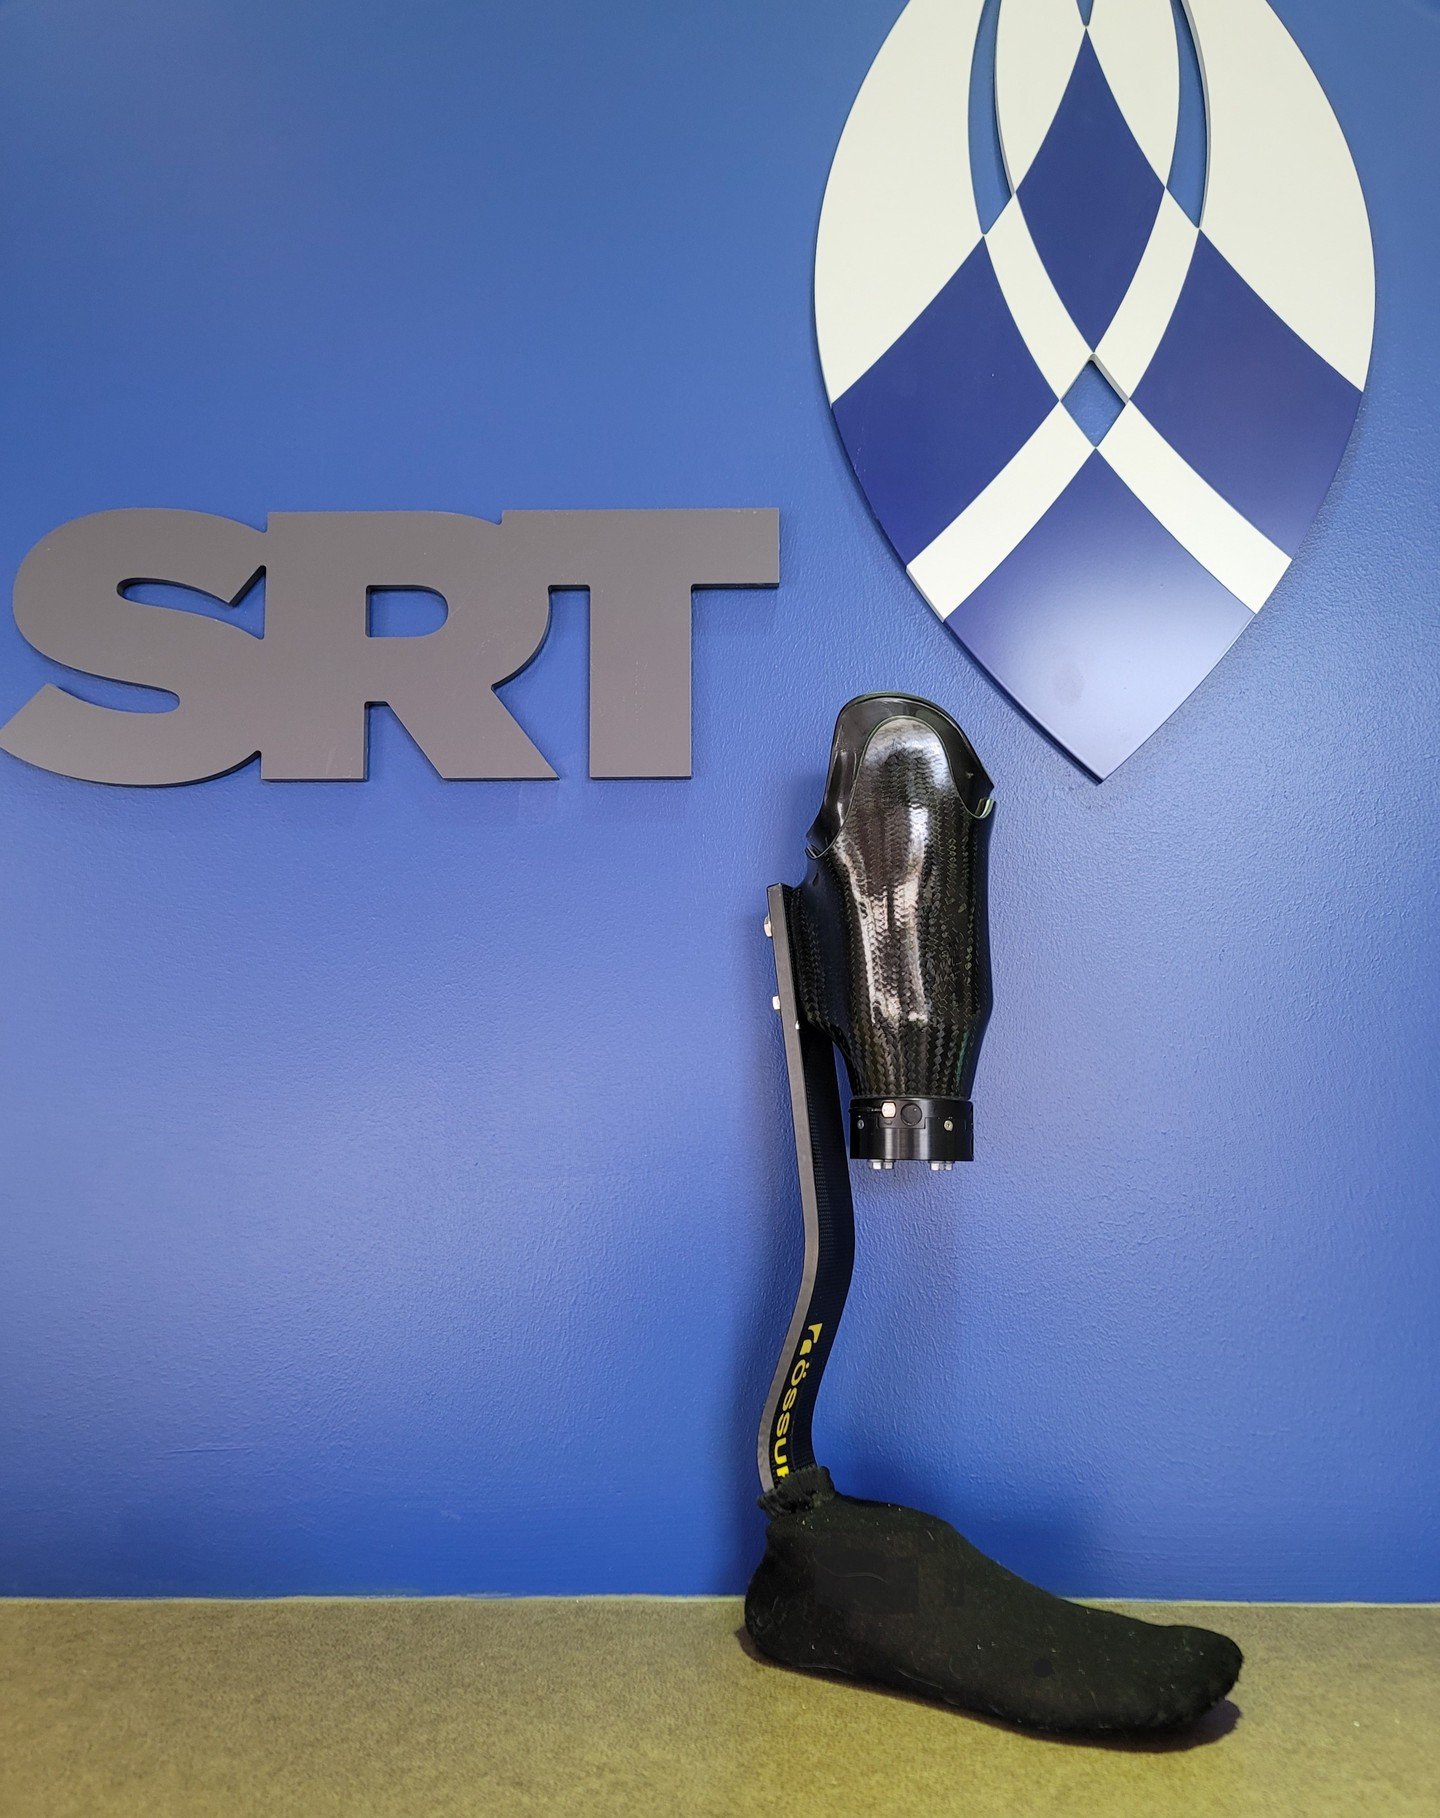 Mark White, a laboratory technician at SRT and a peer mentor, received a fresh replacement socket for his prosthetic running leg. Featured in the image is a Cheetah Explore model equipped with a Wildwood vacuum pump.